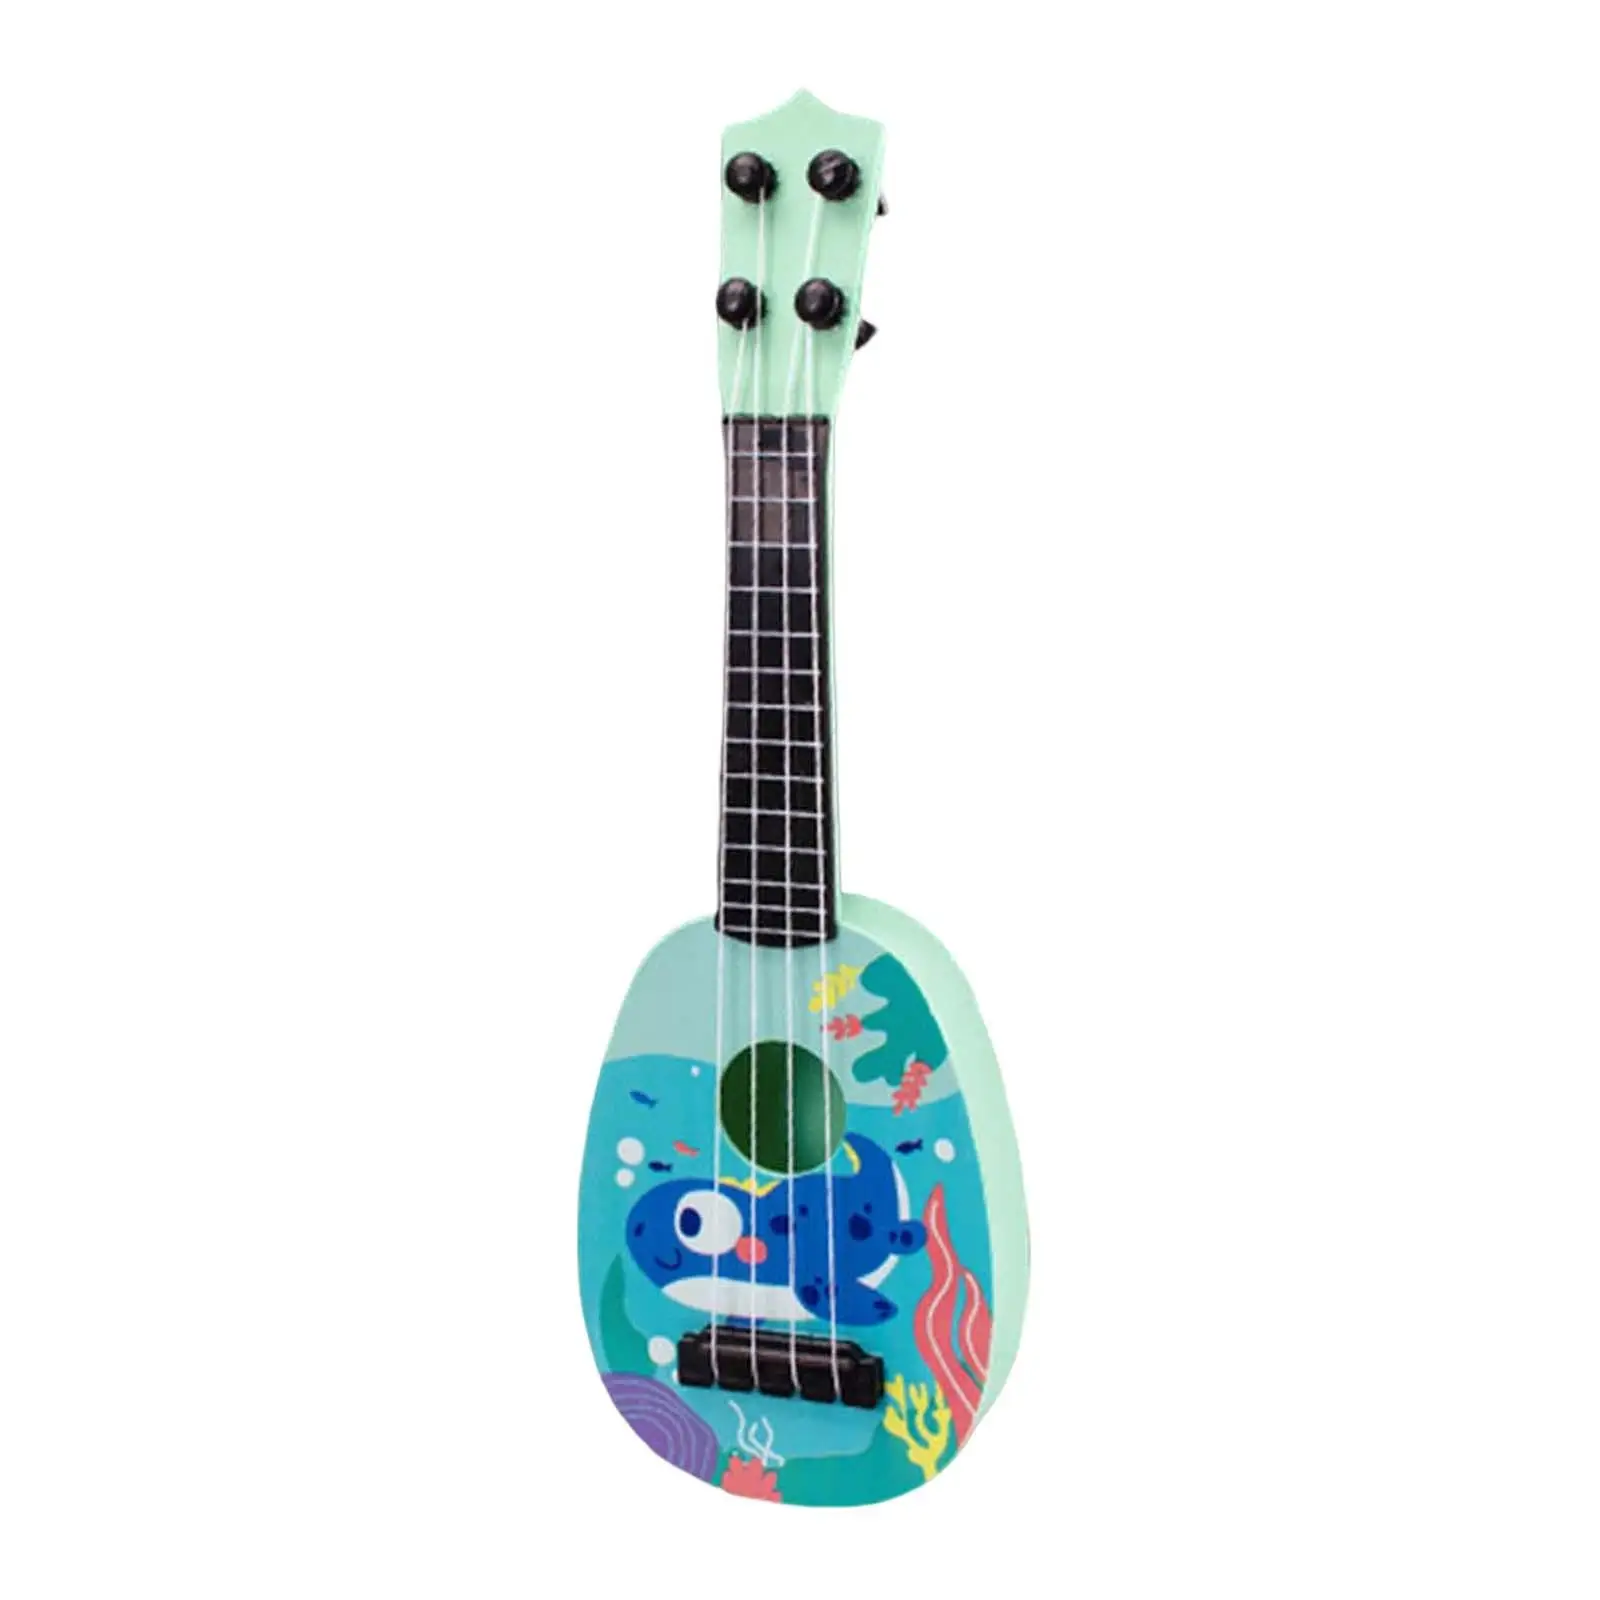 Kids Guitar Musical Toy Keep Tones Educational Toys with 4 Strings Mini Toddler Ukulele Guitar for Preschool Children Kids Gifts